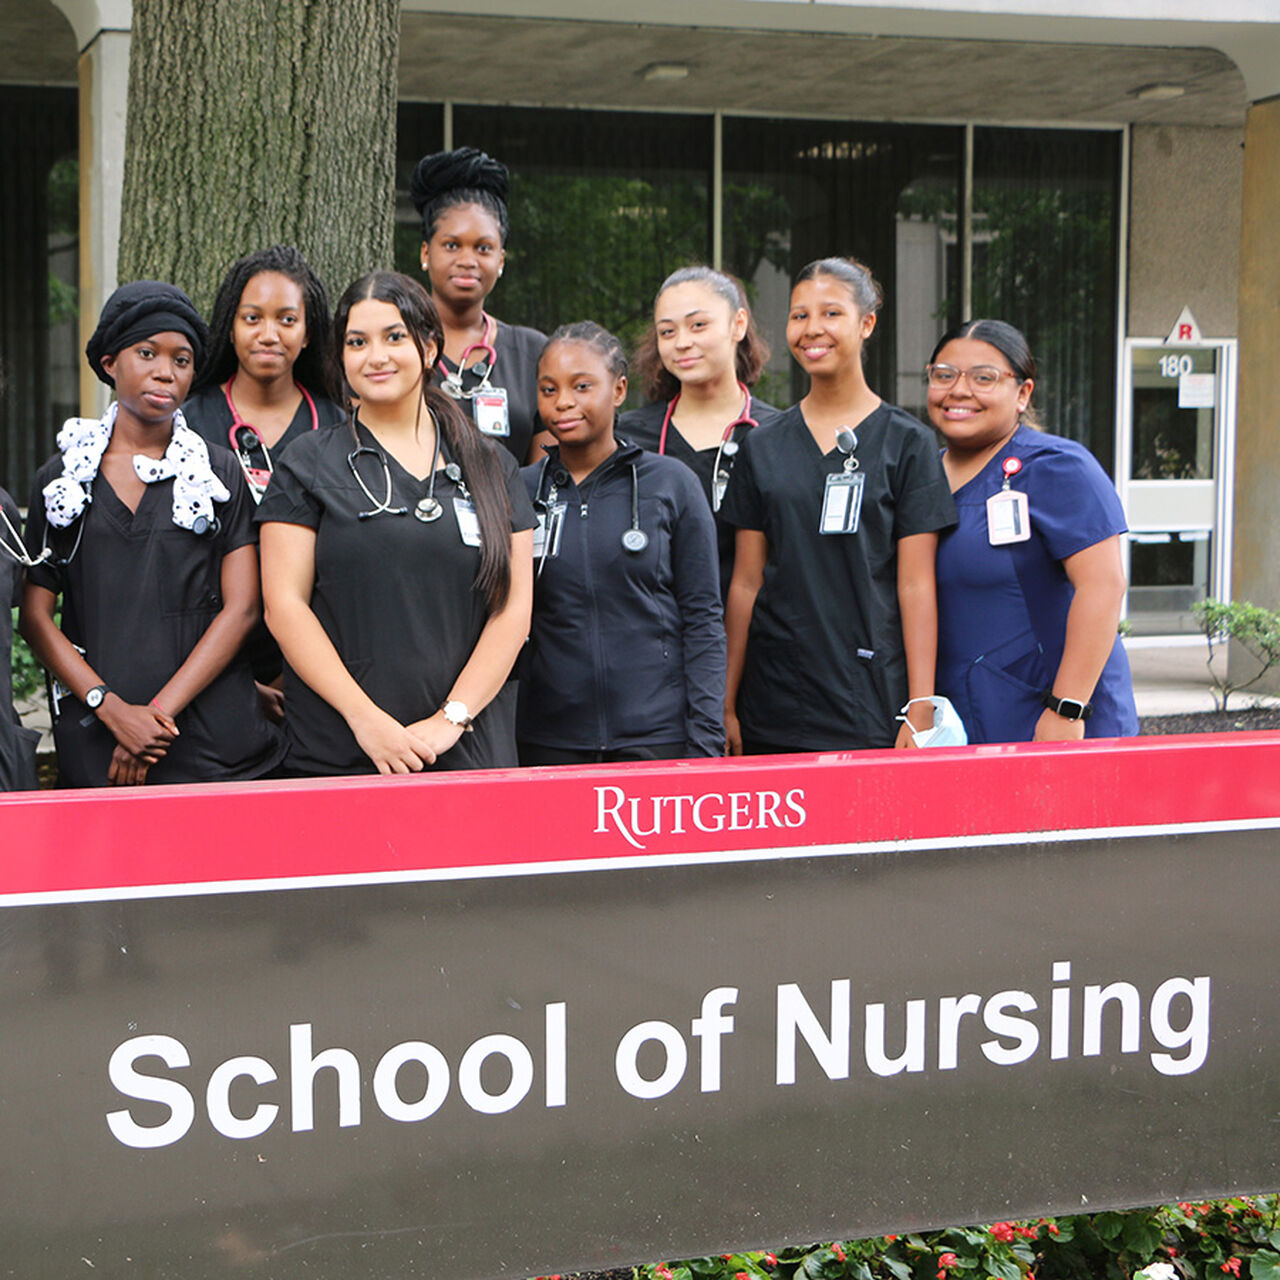 A group of nursing students in scrubs standing behind the Rutgers School of Nursing sign image number 0